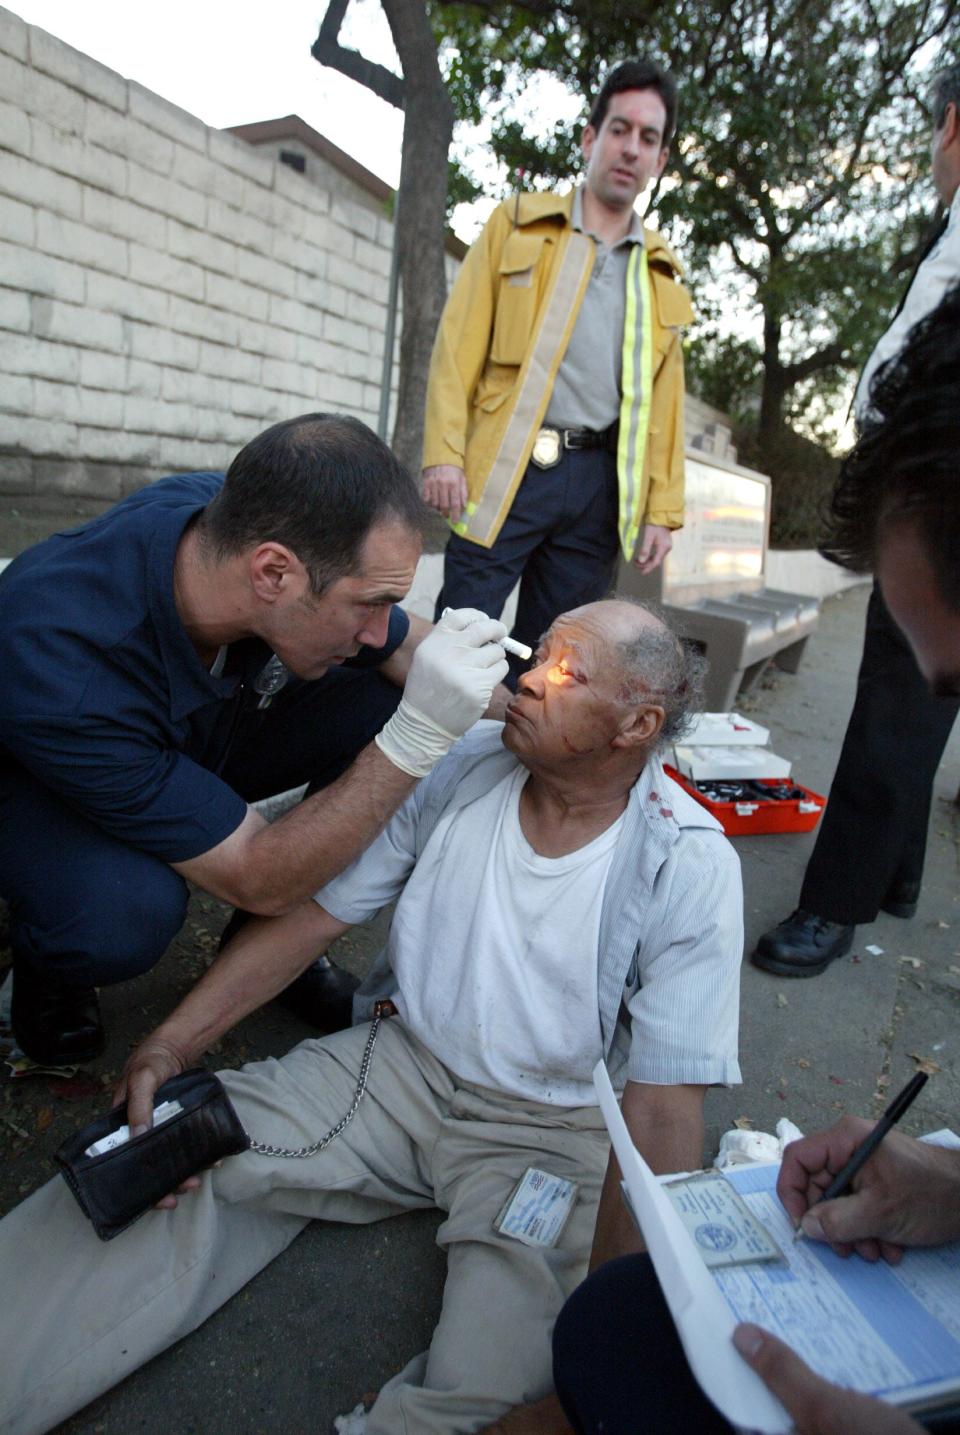 Marc Eckstein watches as emergency medical technician Cecco Secci checks Monroe Hall, 76, for a concussion after Monroe fell and hit his head in a South Central Los Angeles neighborhood on Nov. 21, 2002. Eckstein, EMS medical director for L.A. County, is trying to improve the overall quality of EMS in Los Angeles.  